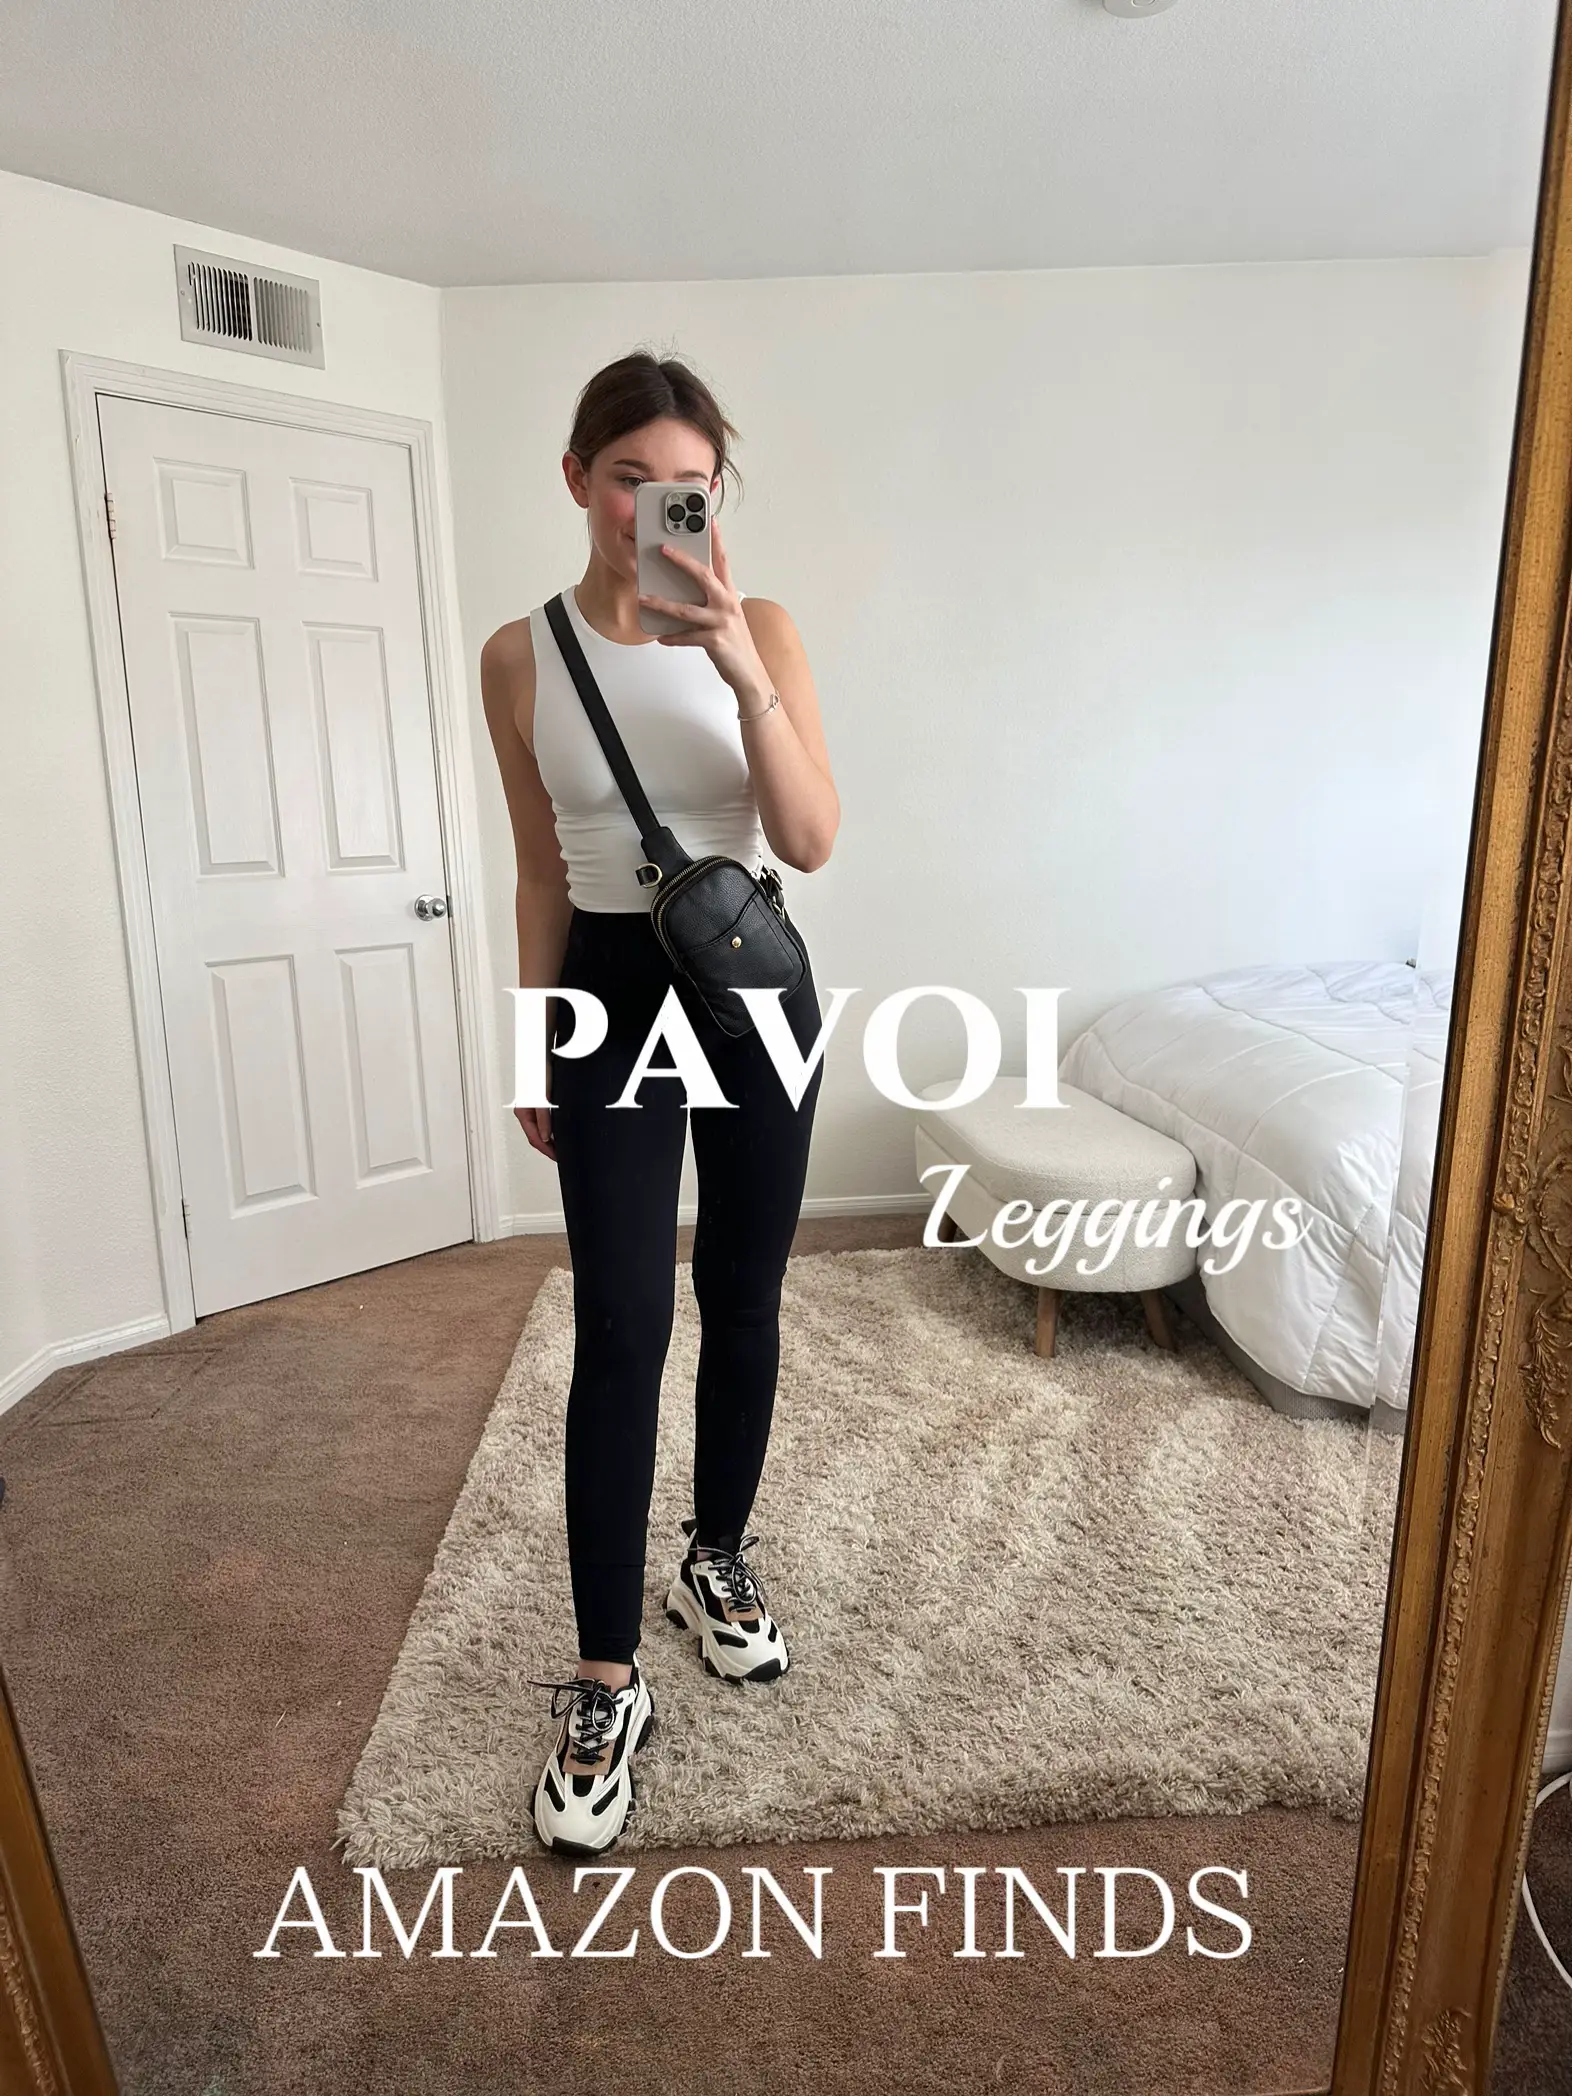 NEW SERIES - Activewear Review & Style 2 Ways. These are the Pavoi Per